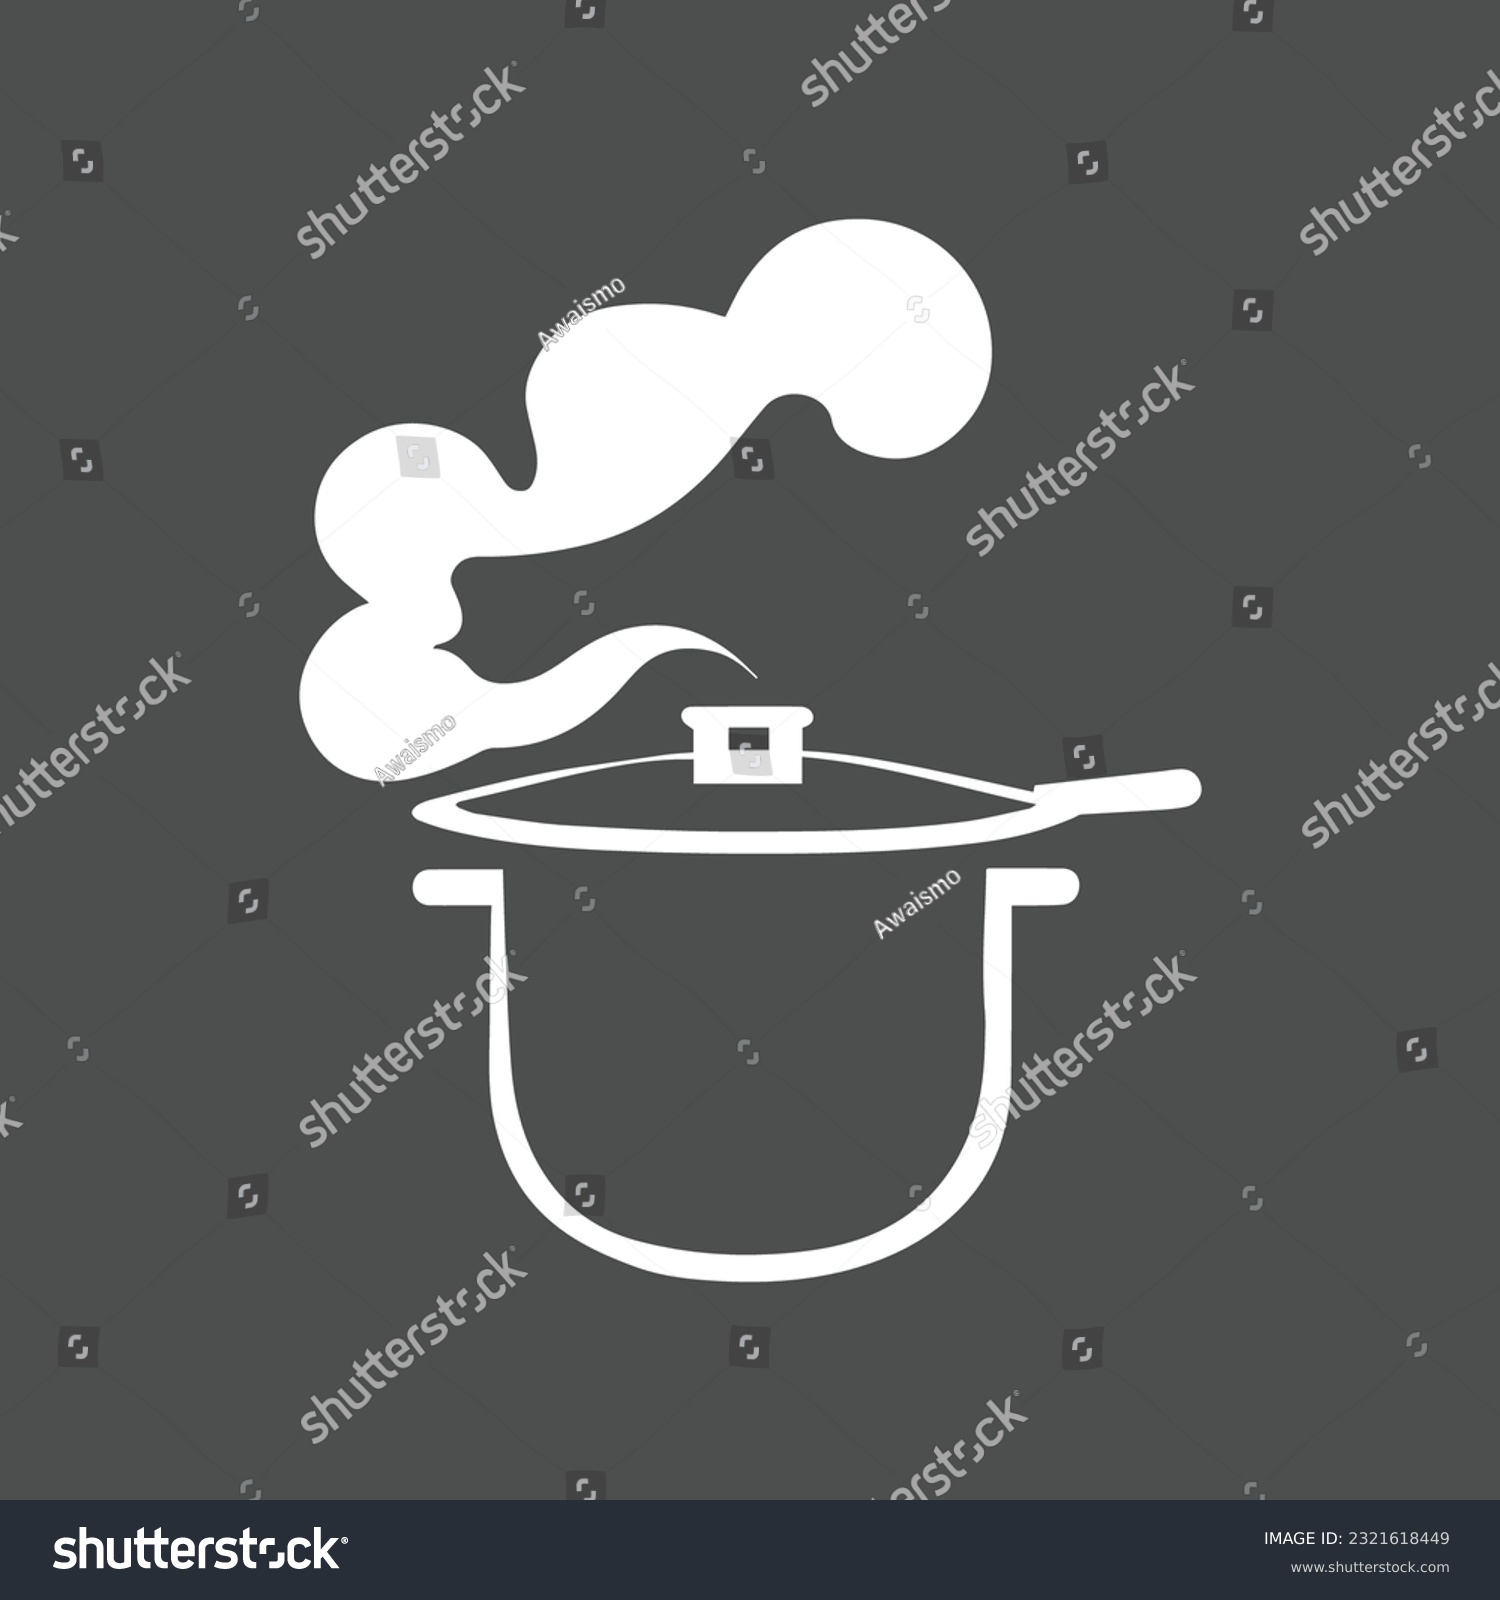 Pans icon in simple style. Cooking in a saucepan with steam, stirring, warm homemade food. Logos isolated on white background. #2321618449